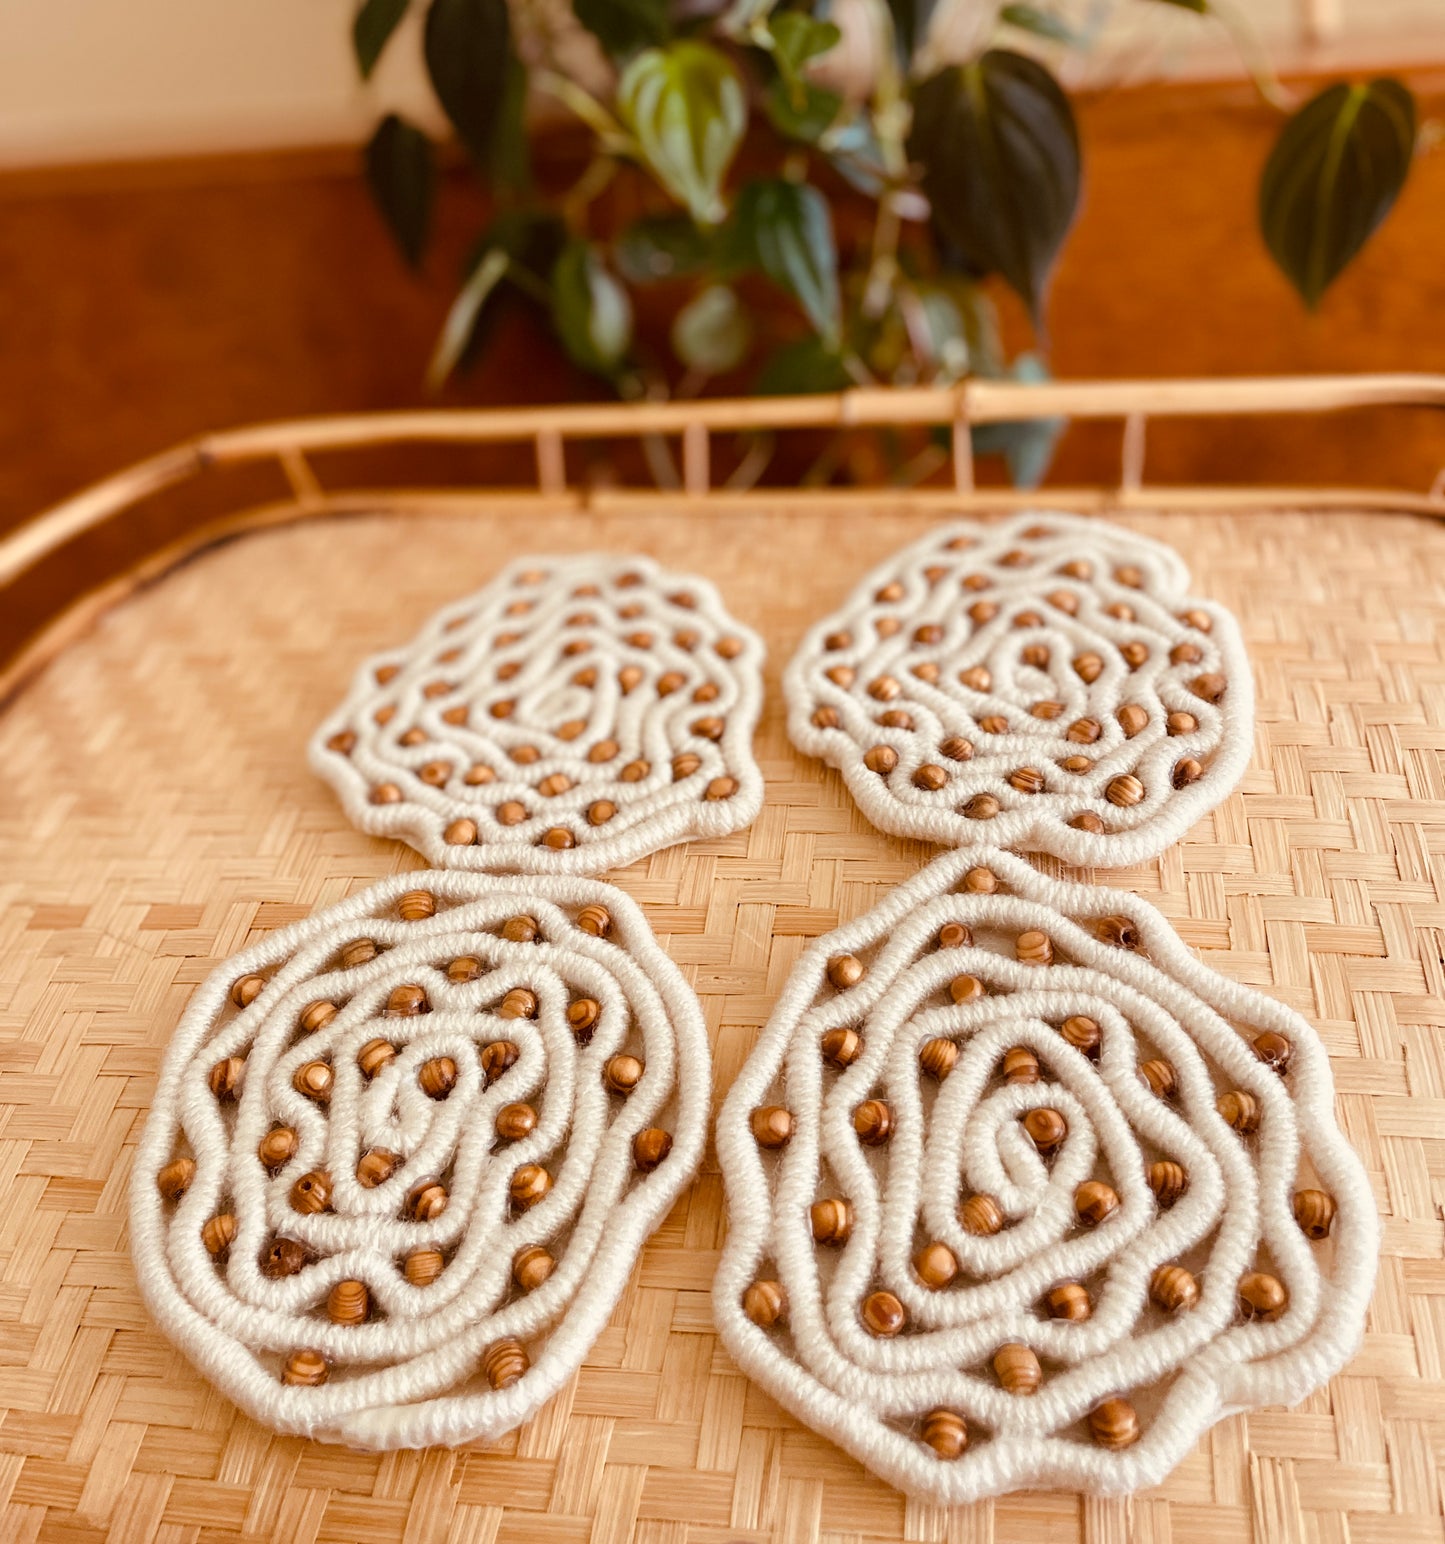 Very unique coaster set made with cream yarn wrapped rope with brown wood beads embedded throughout for a lattice pattern.  Materials: acrylic yarn, rope, wood beads, hot glue, felt fabric (on bottom)